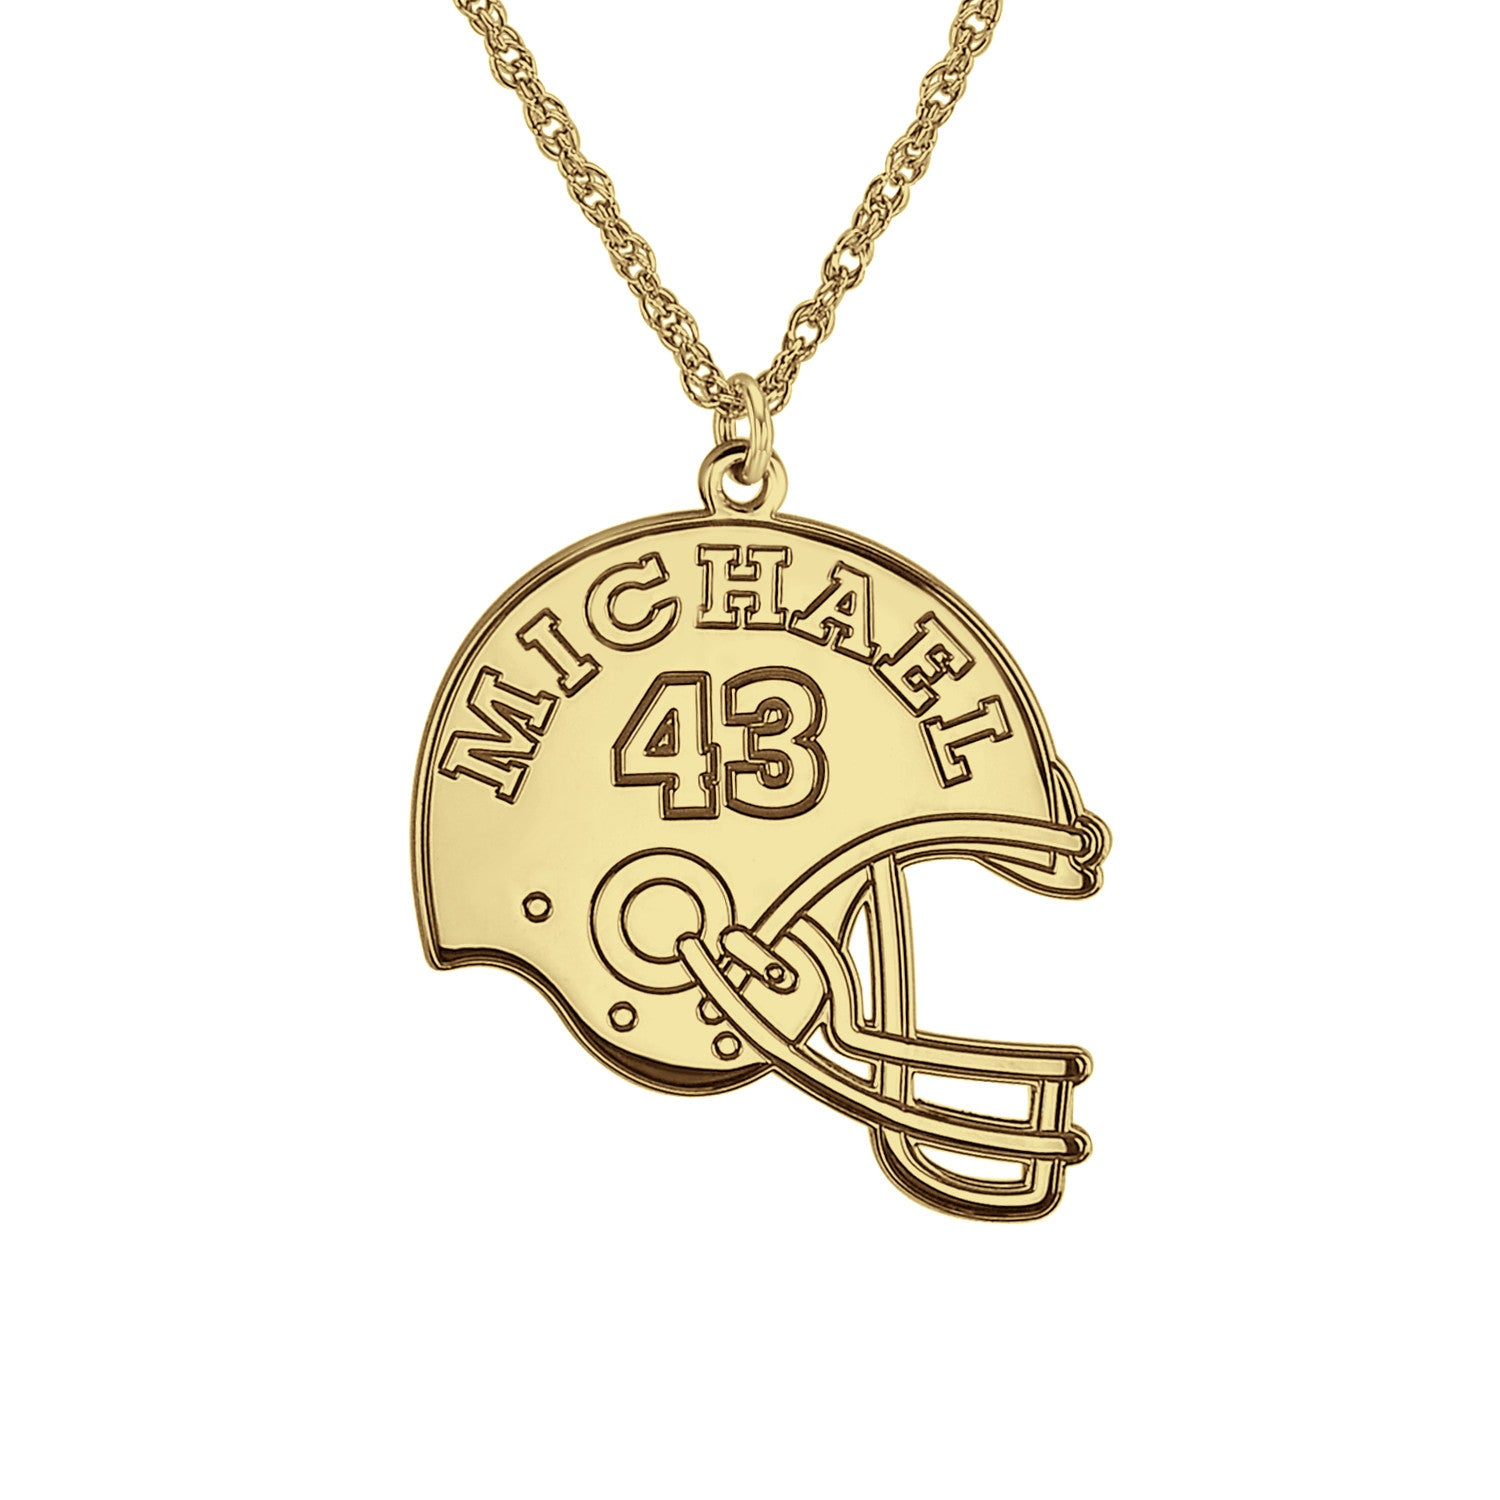 Personalized Football Necklace Engraved Initial Number - CALLIE | Engraved  initials, Football necklace, Engraved necklace